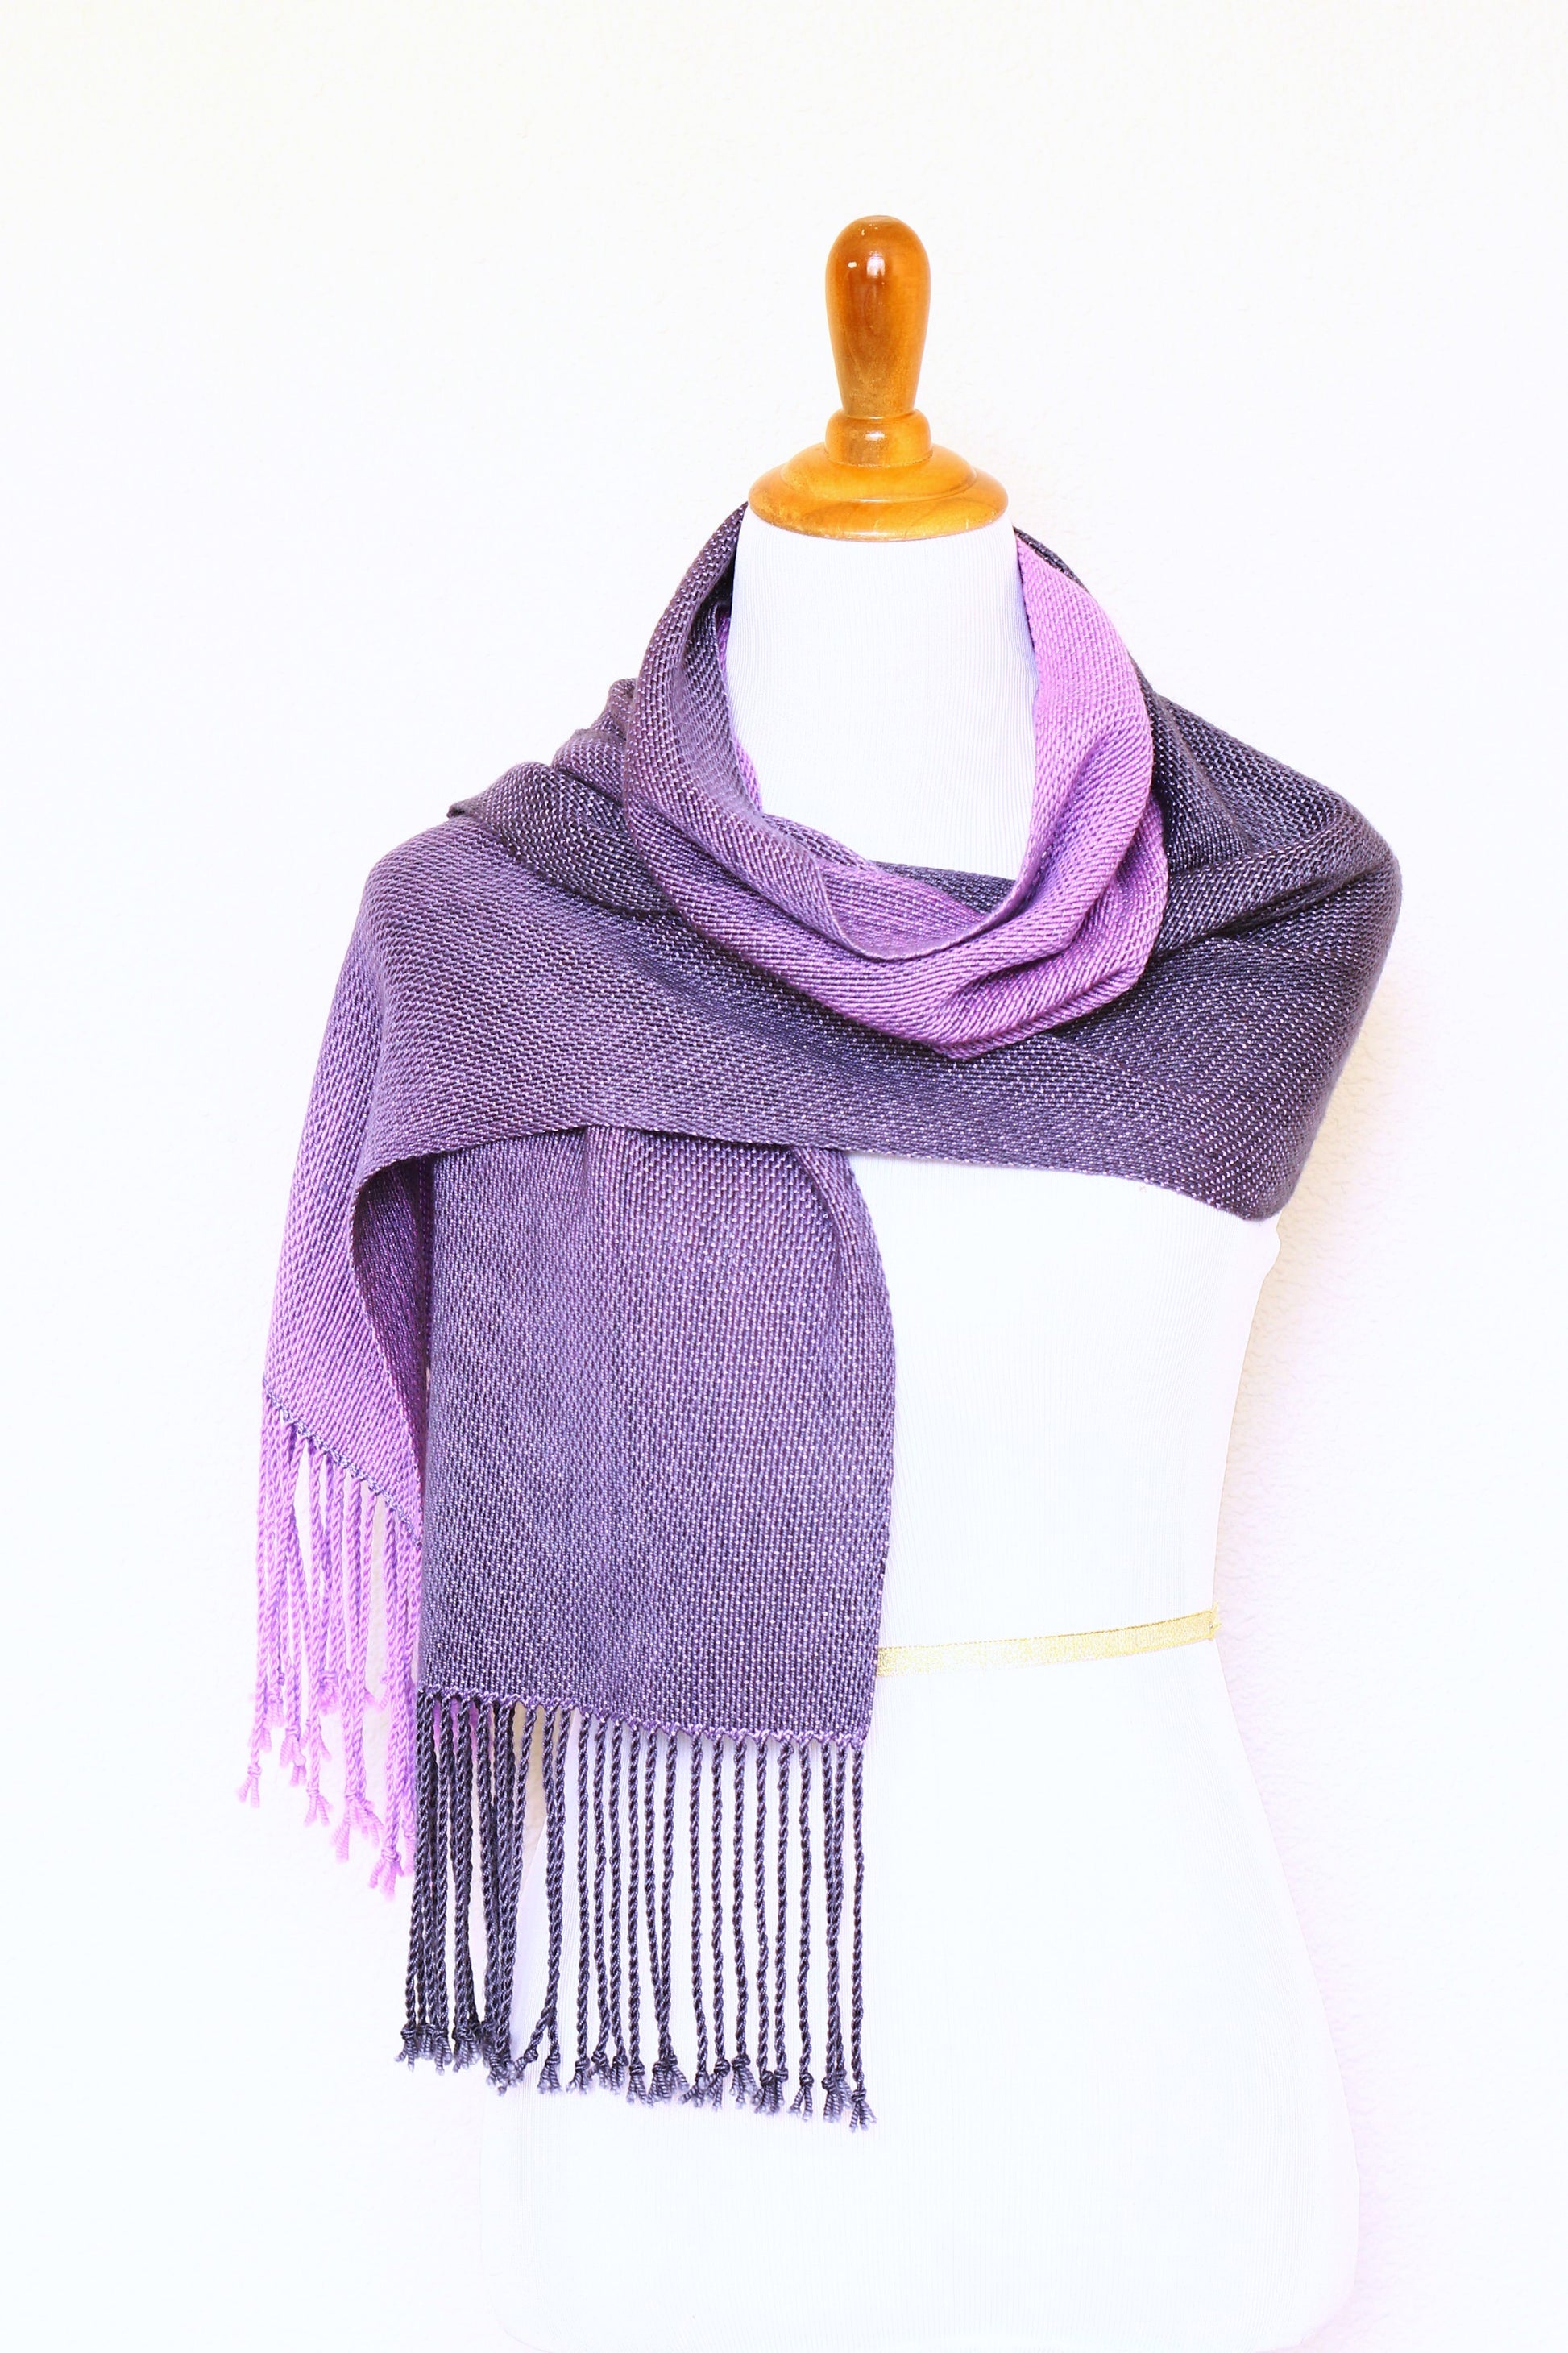 Woven scarf in gradient violet colors, wool scarf, gift for her